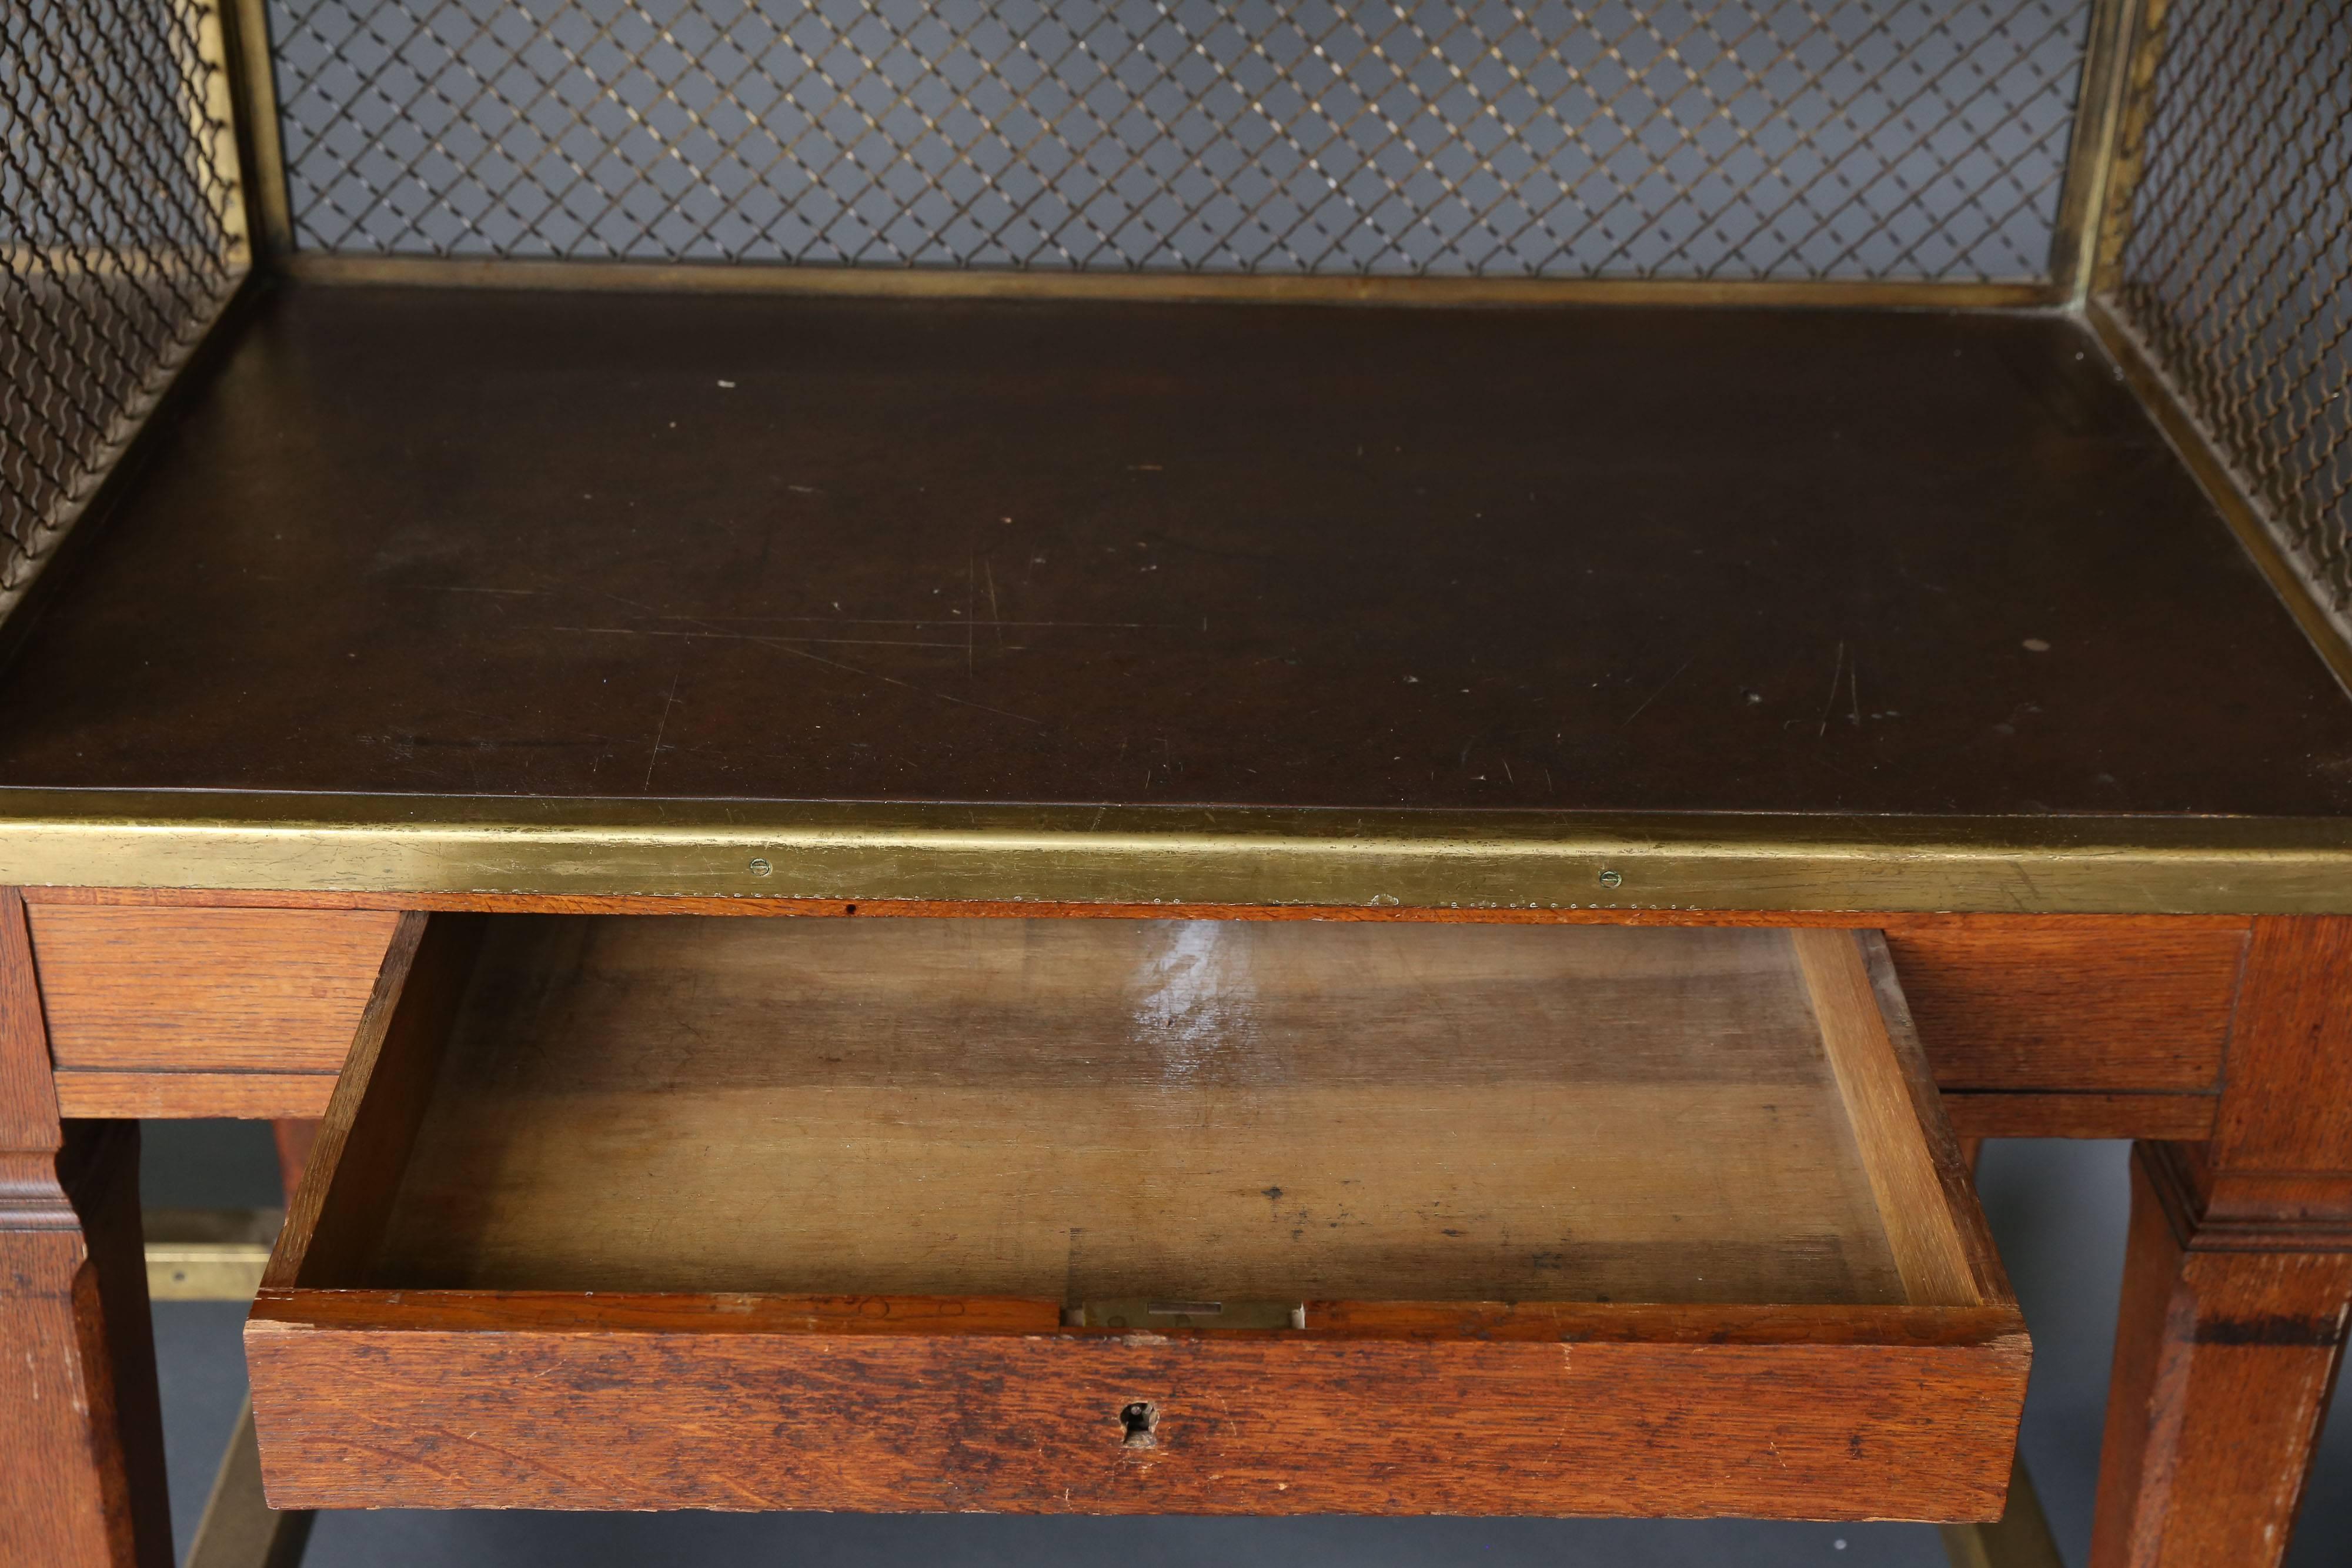 19th century oak and brass bank work counter that would work as a double desk or make a great bar. There are two shelves on the back. Brass webbing on back, perimeter and sides. Measures: L 85" x W 25.5" x H 30" 47" to top shelf.